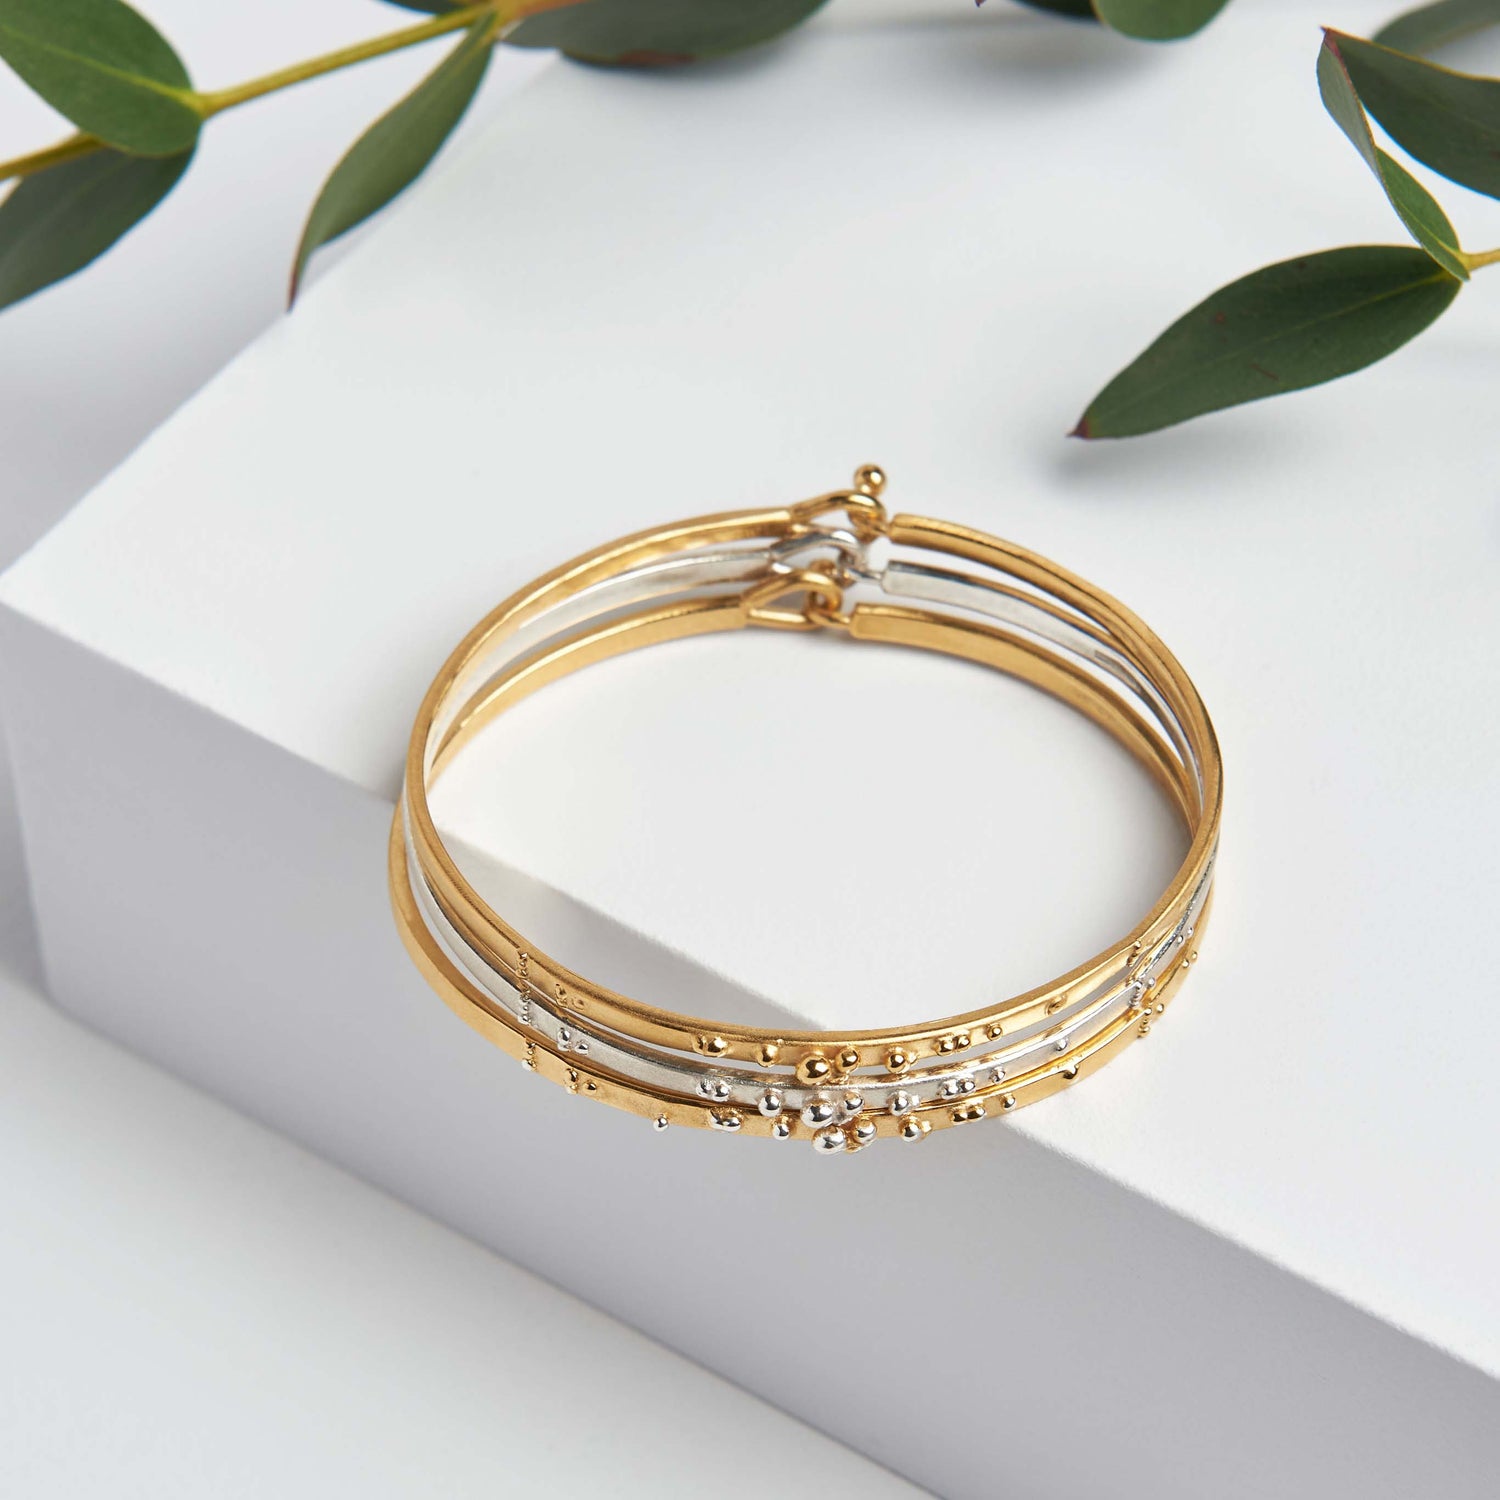 British independent Jewellery brand Liv Thurlwell Jewellery has launched a range of Valentine’s bracelets featuring braille writing, with a donation made to Sightsavers for every bracelet sold.